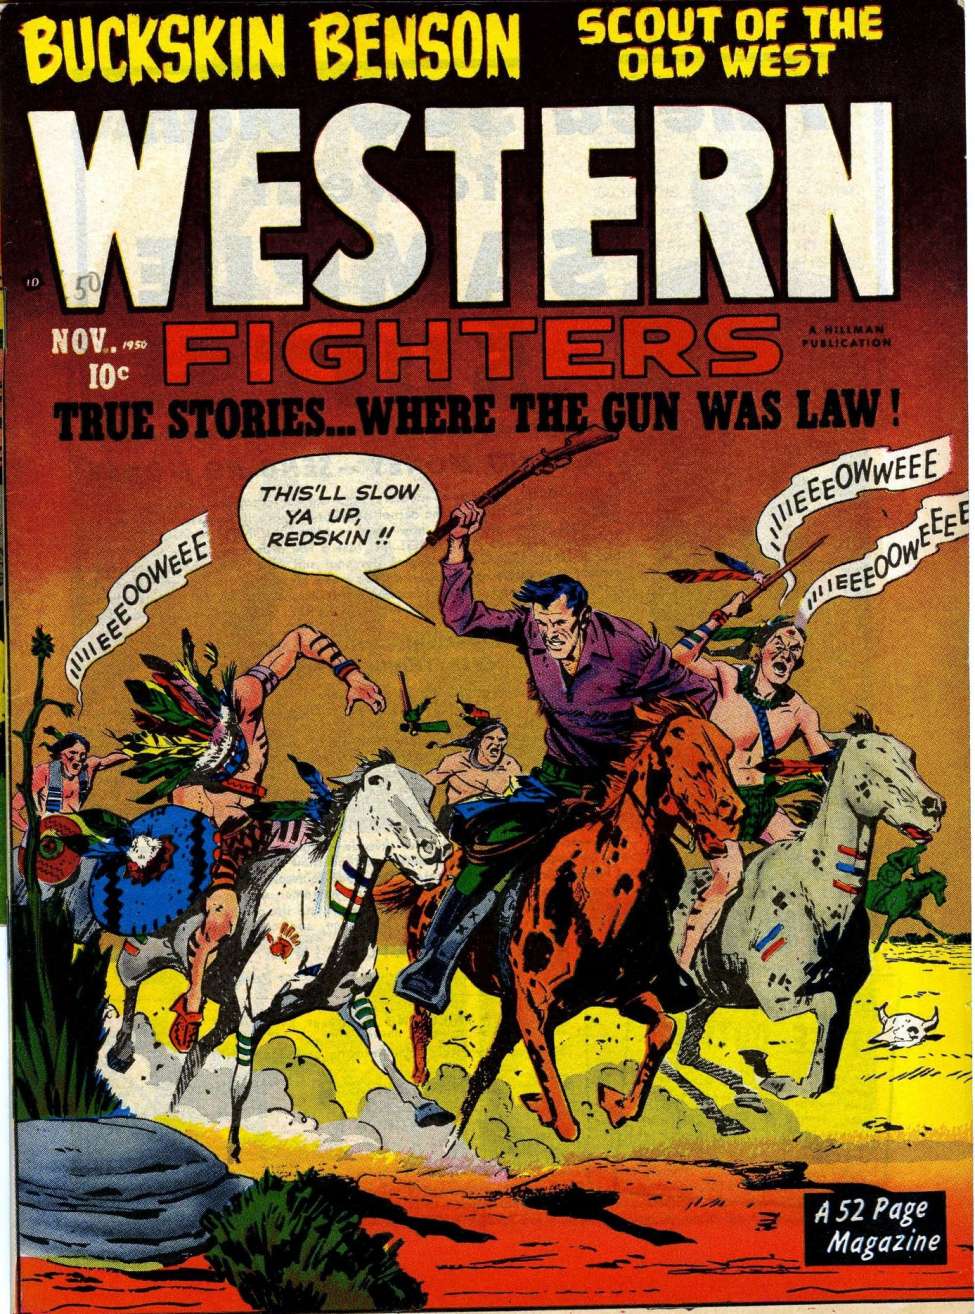 Comic Book Cover For Western Fighters v2 12 (alt) - Version 2